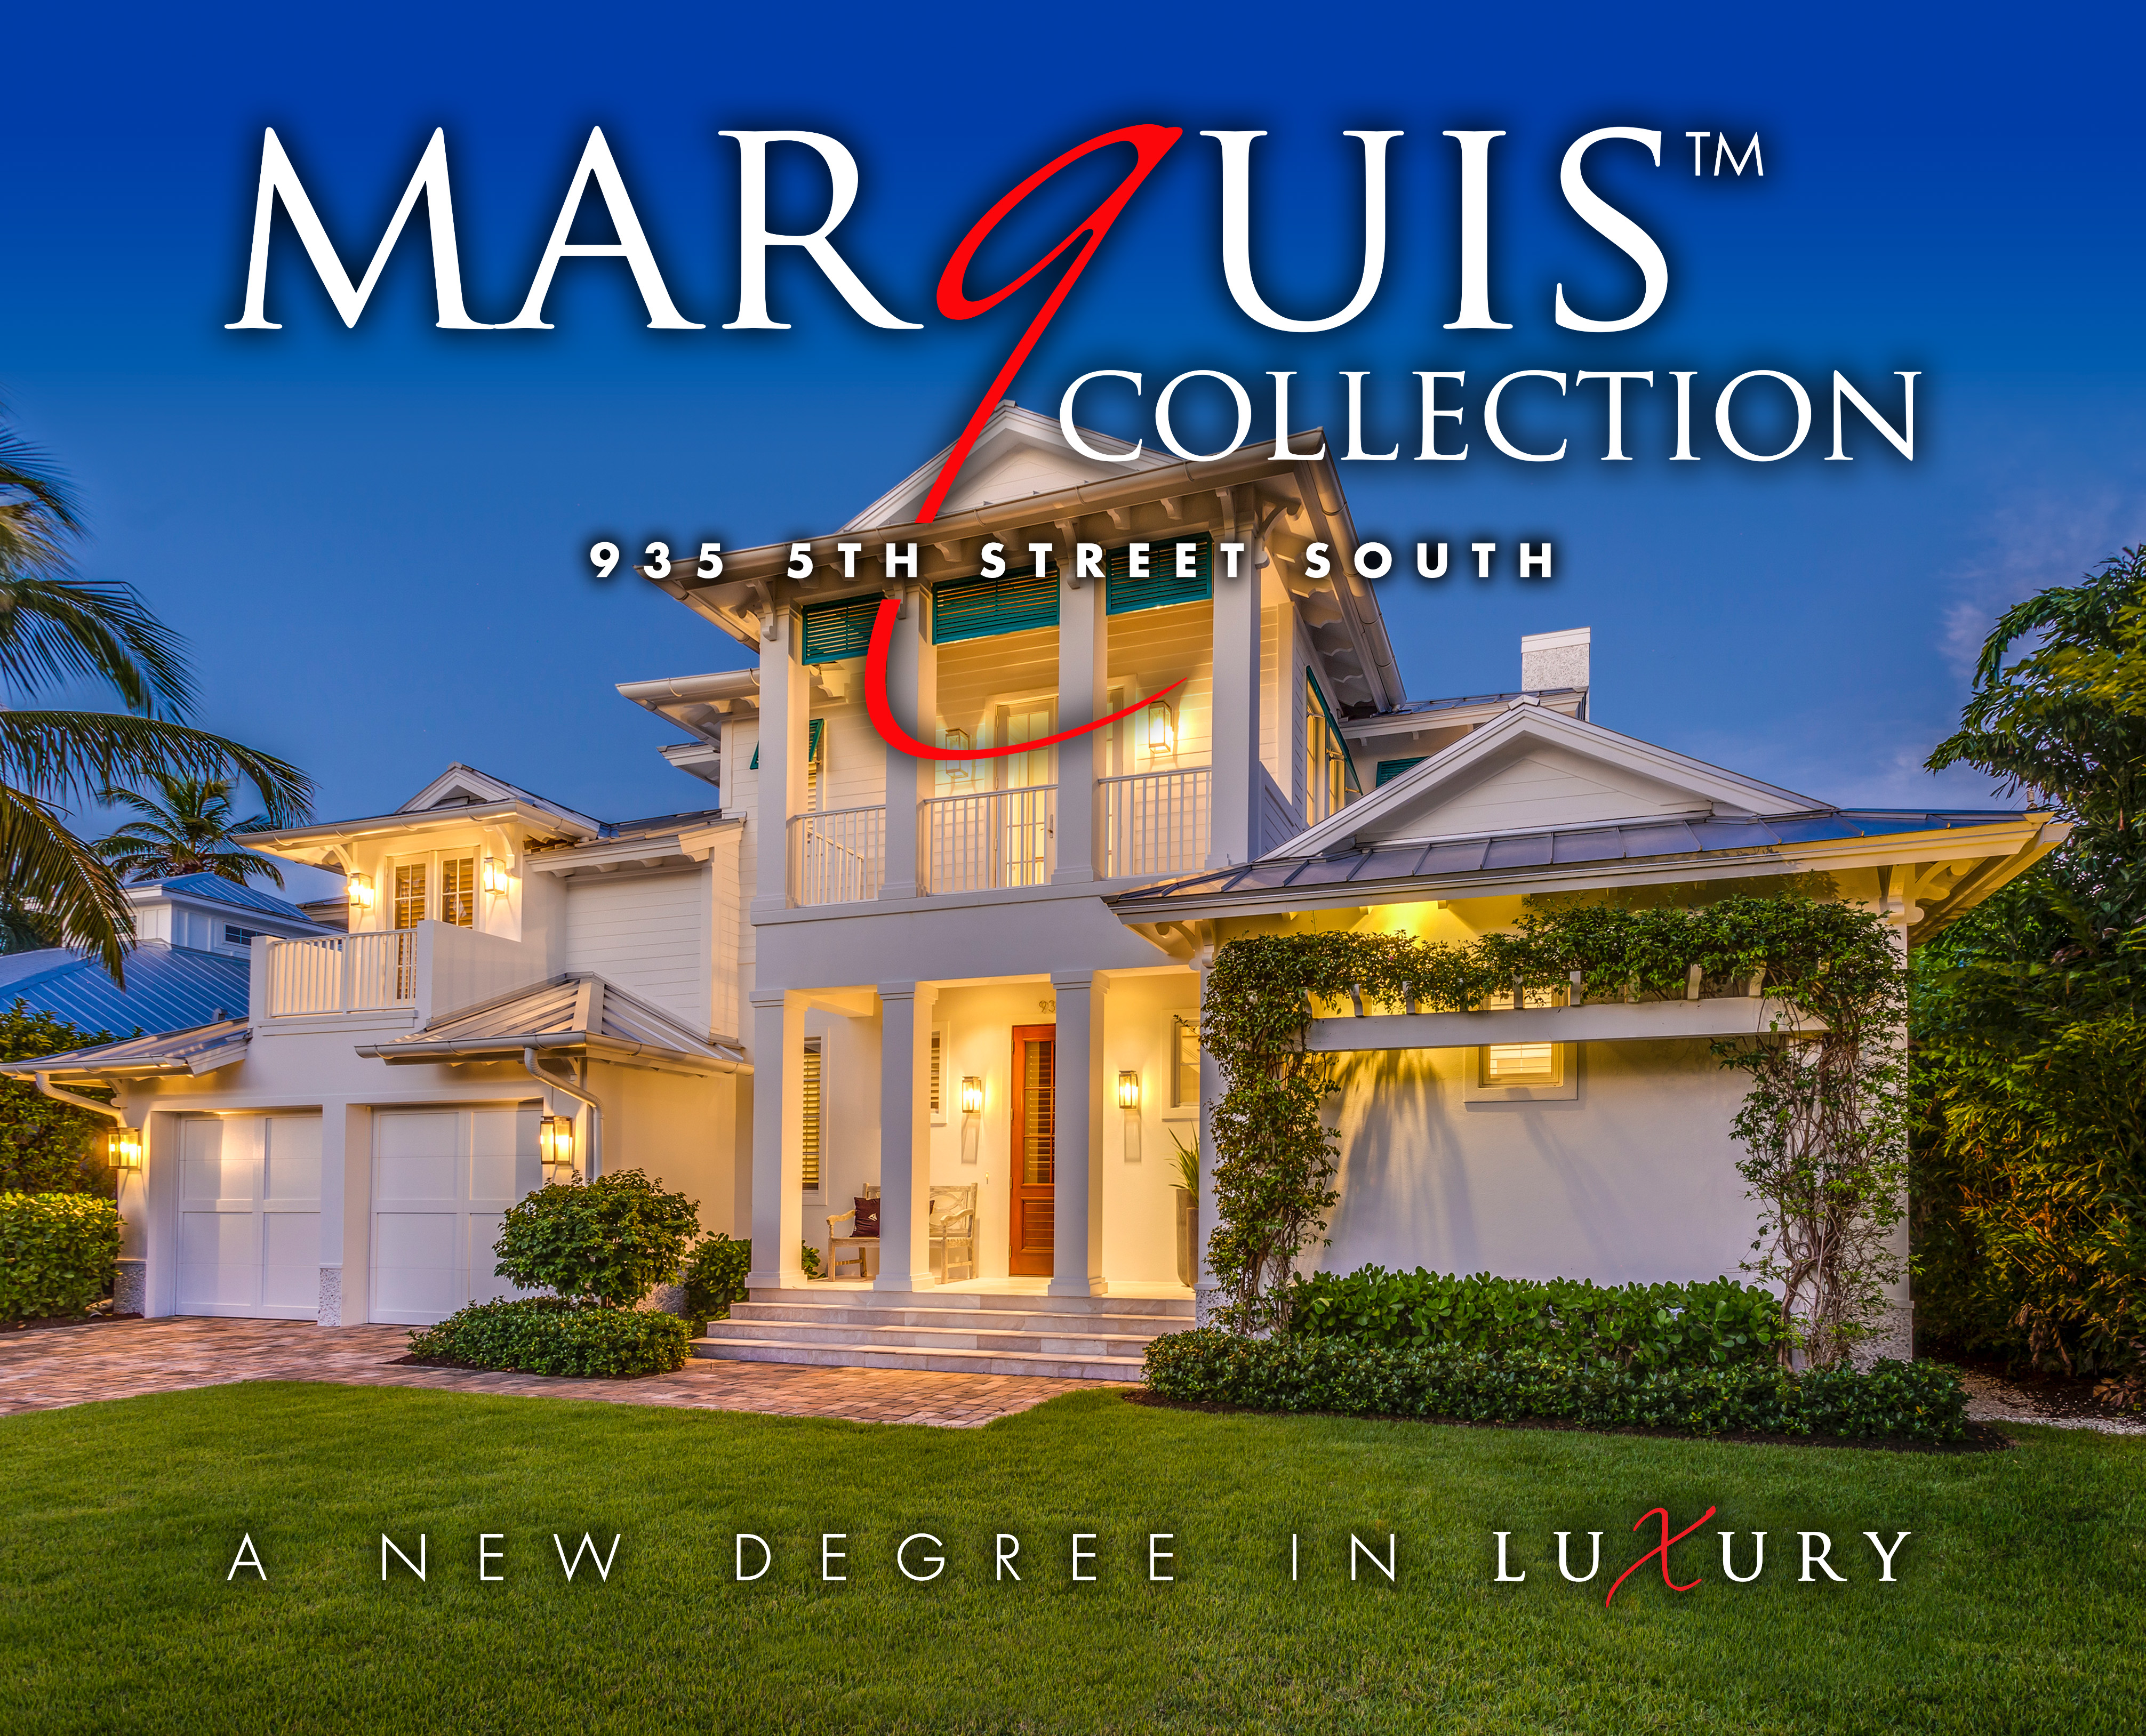 MARQUIS COLLECTION